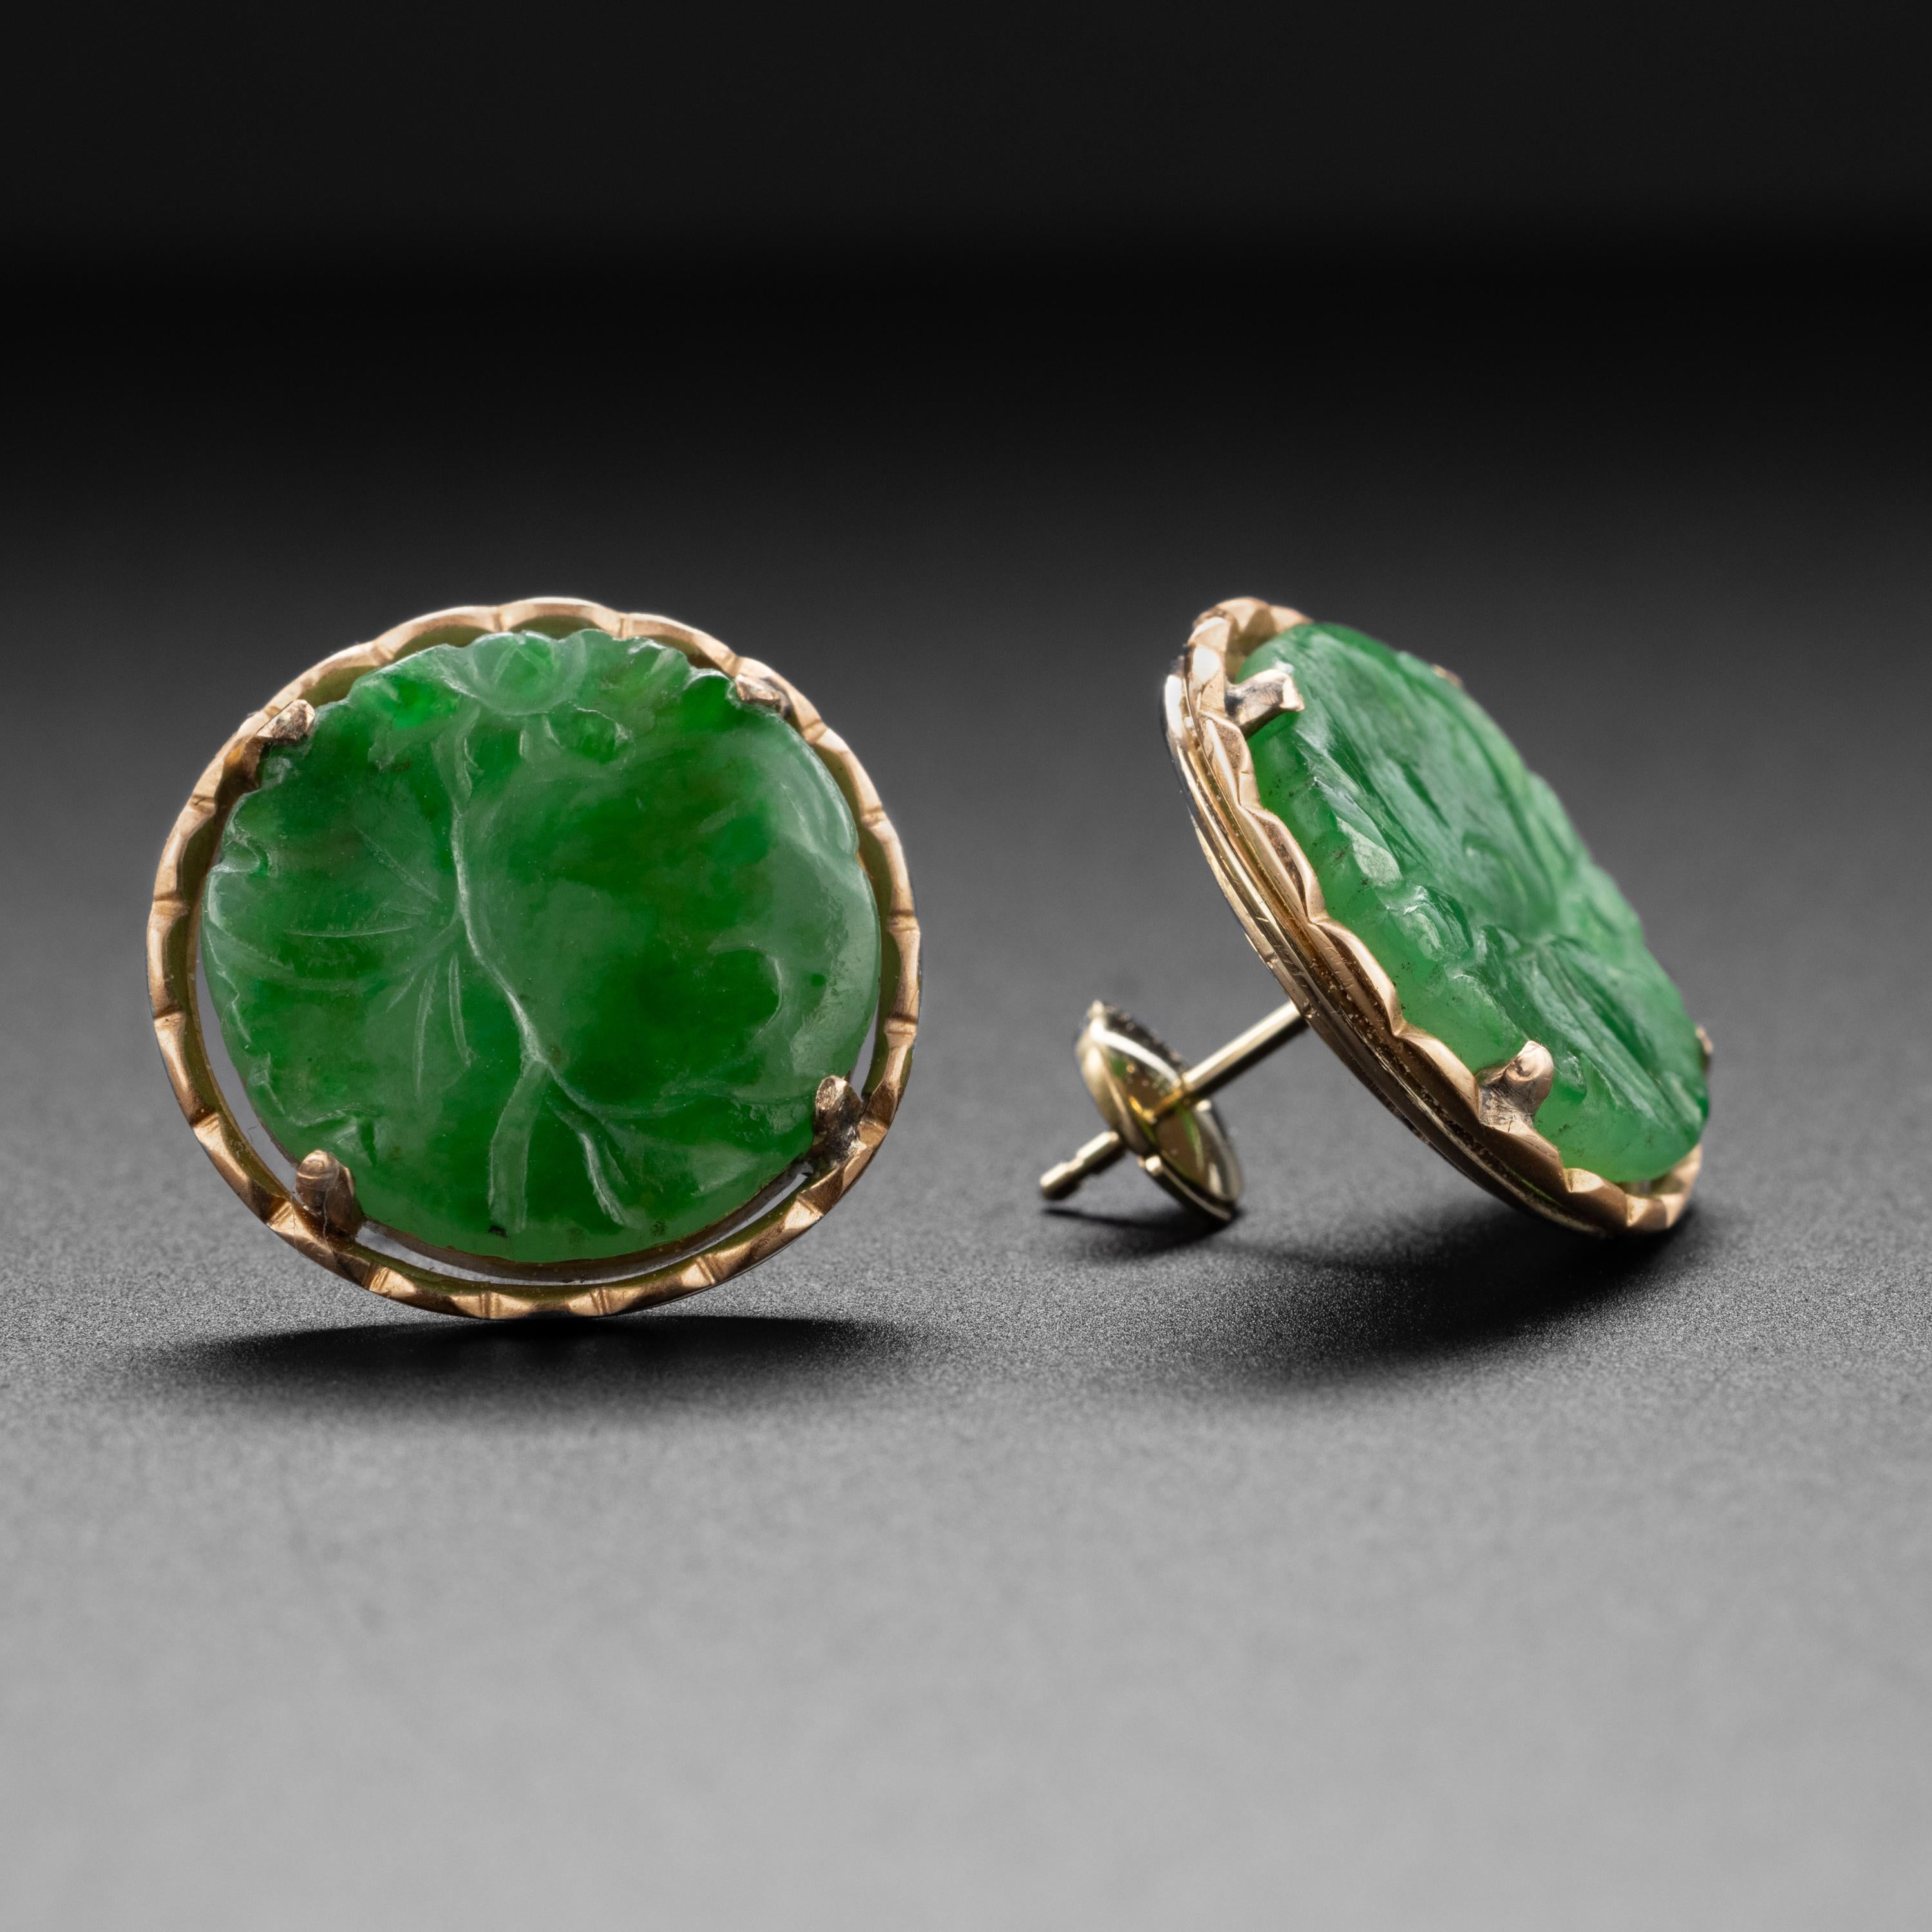 They began life in the middle of the previous century as a pair of men's cufflinks. But like so many of us, they have been reinvented and today they are a magnificent pair of earrings. Rich emerald green disks of hand-carved and polished jade in a